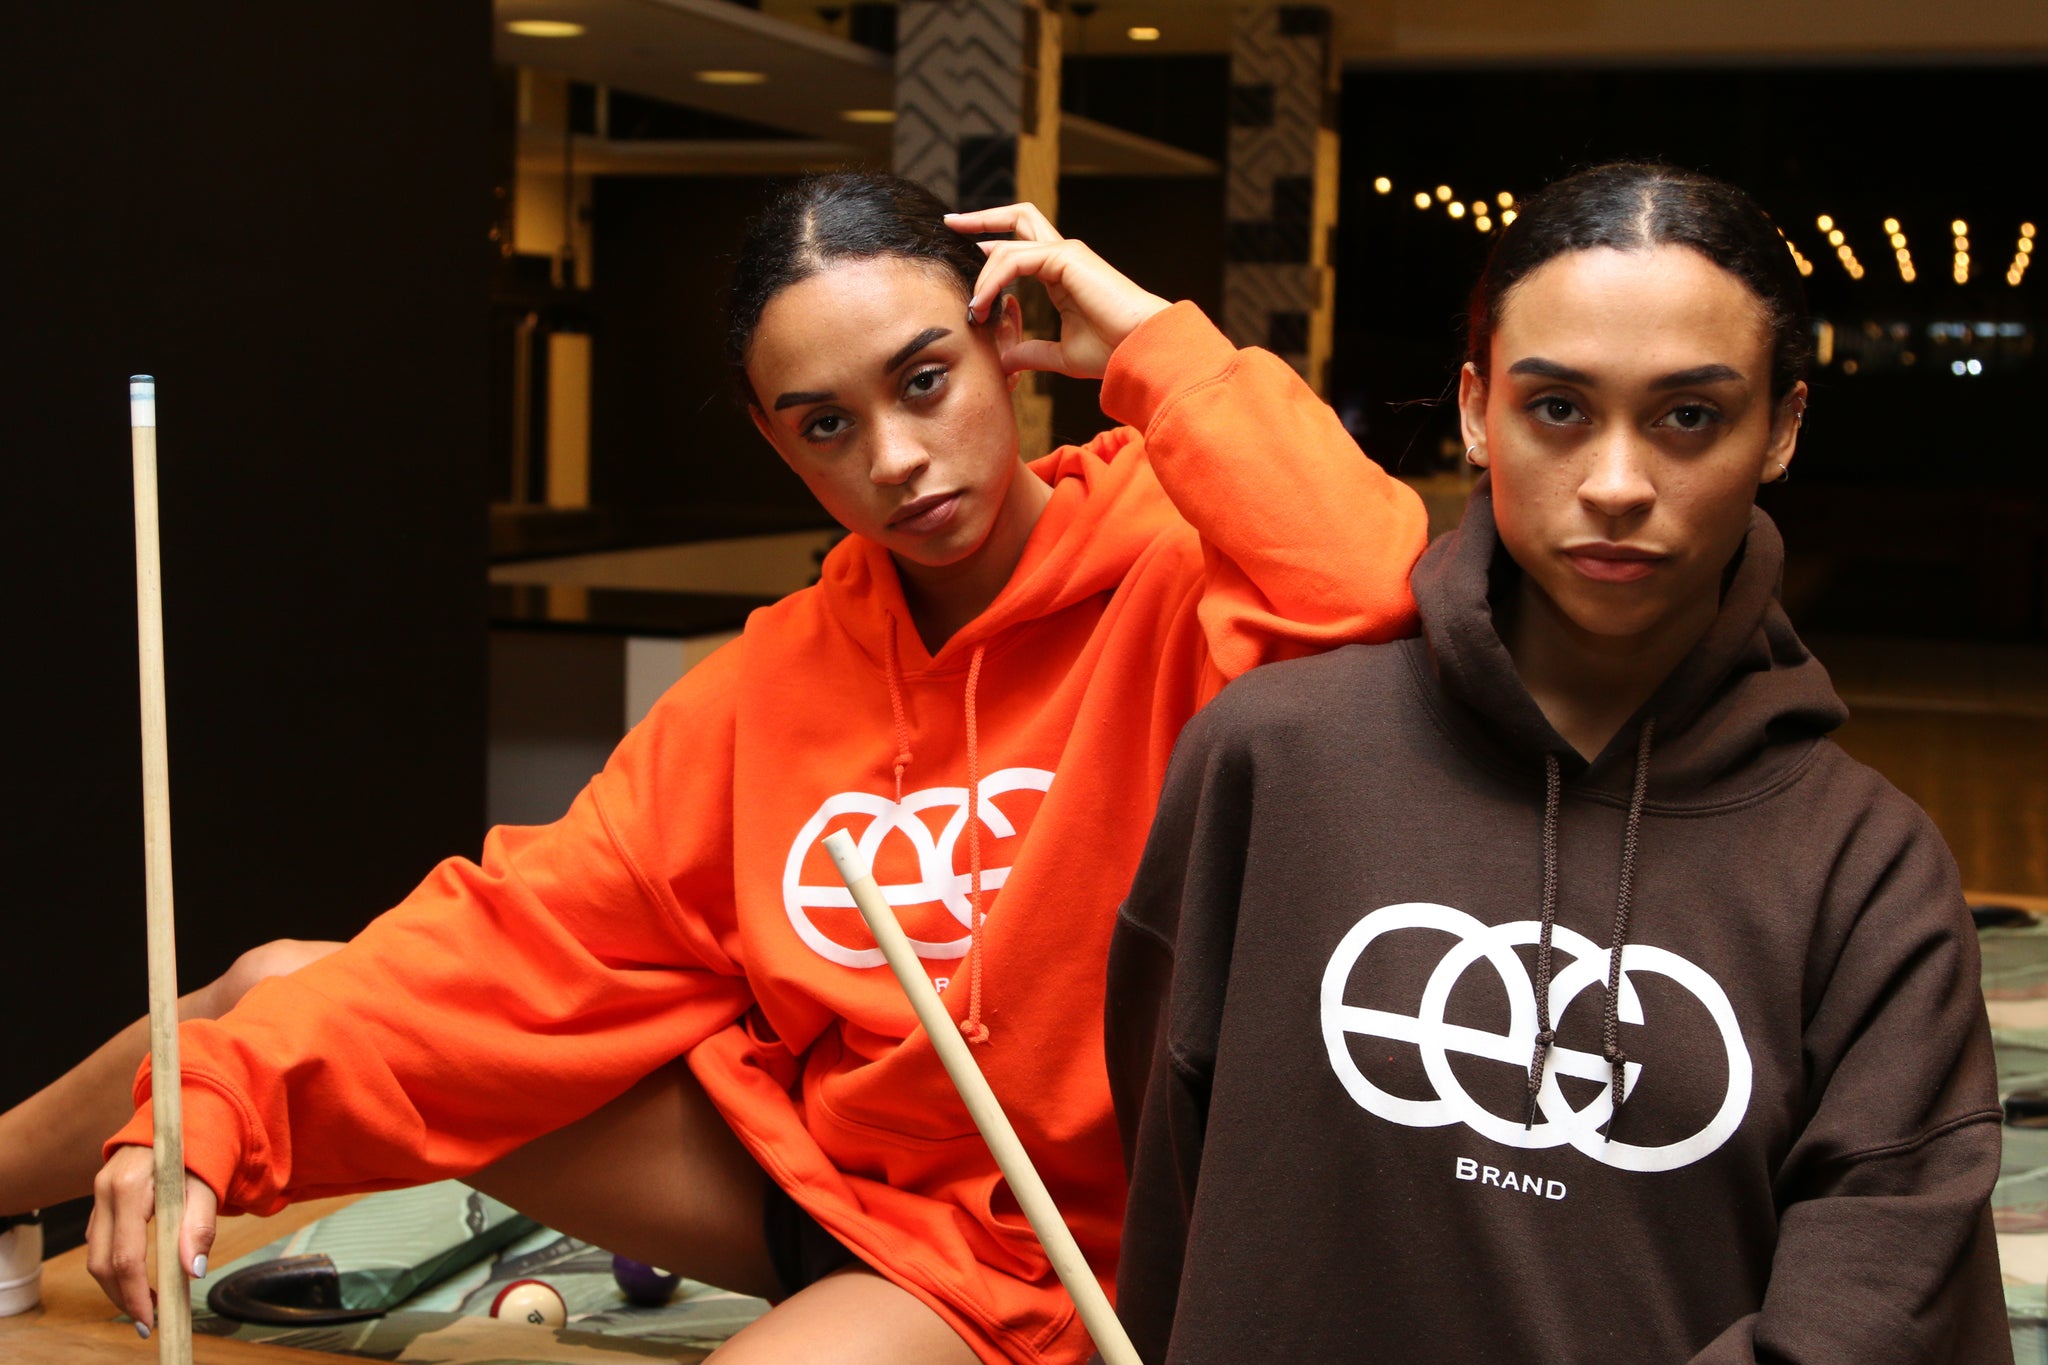 EGO Brand Pullover Hoodie